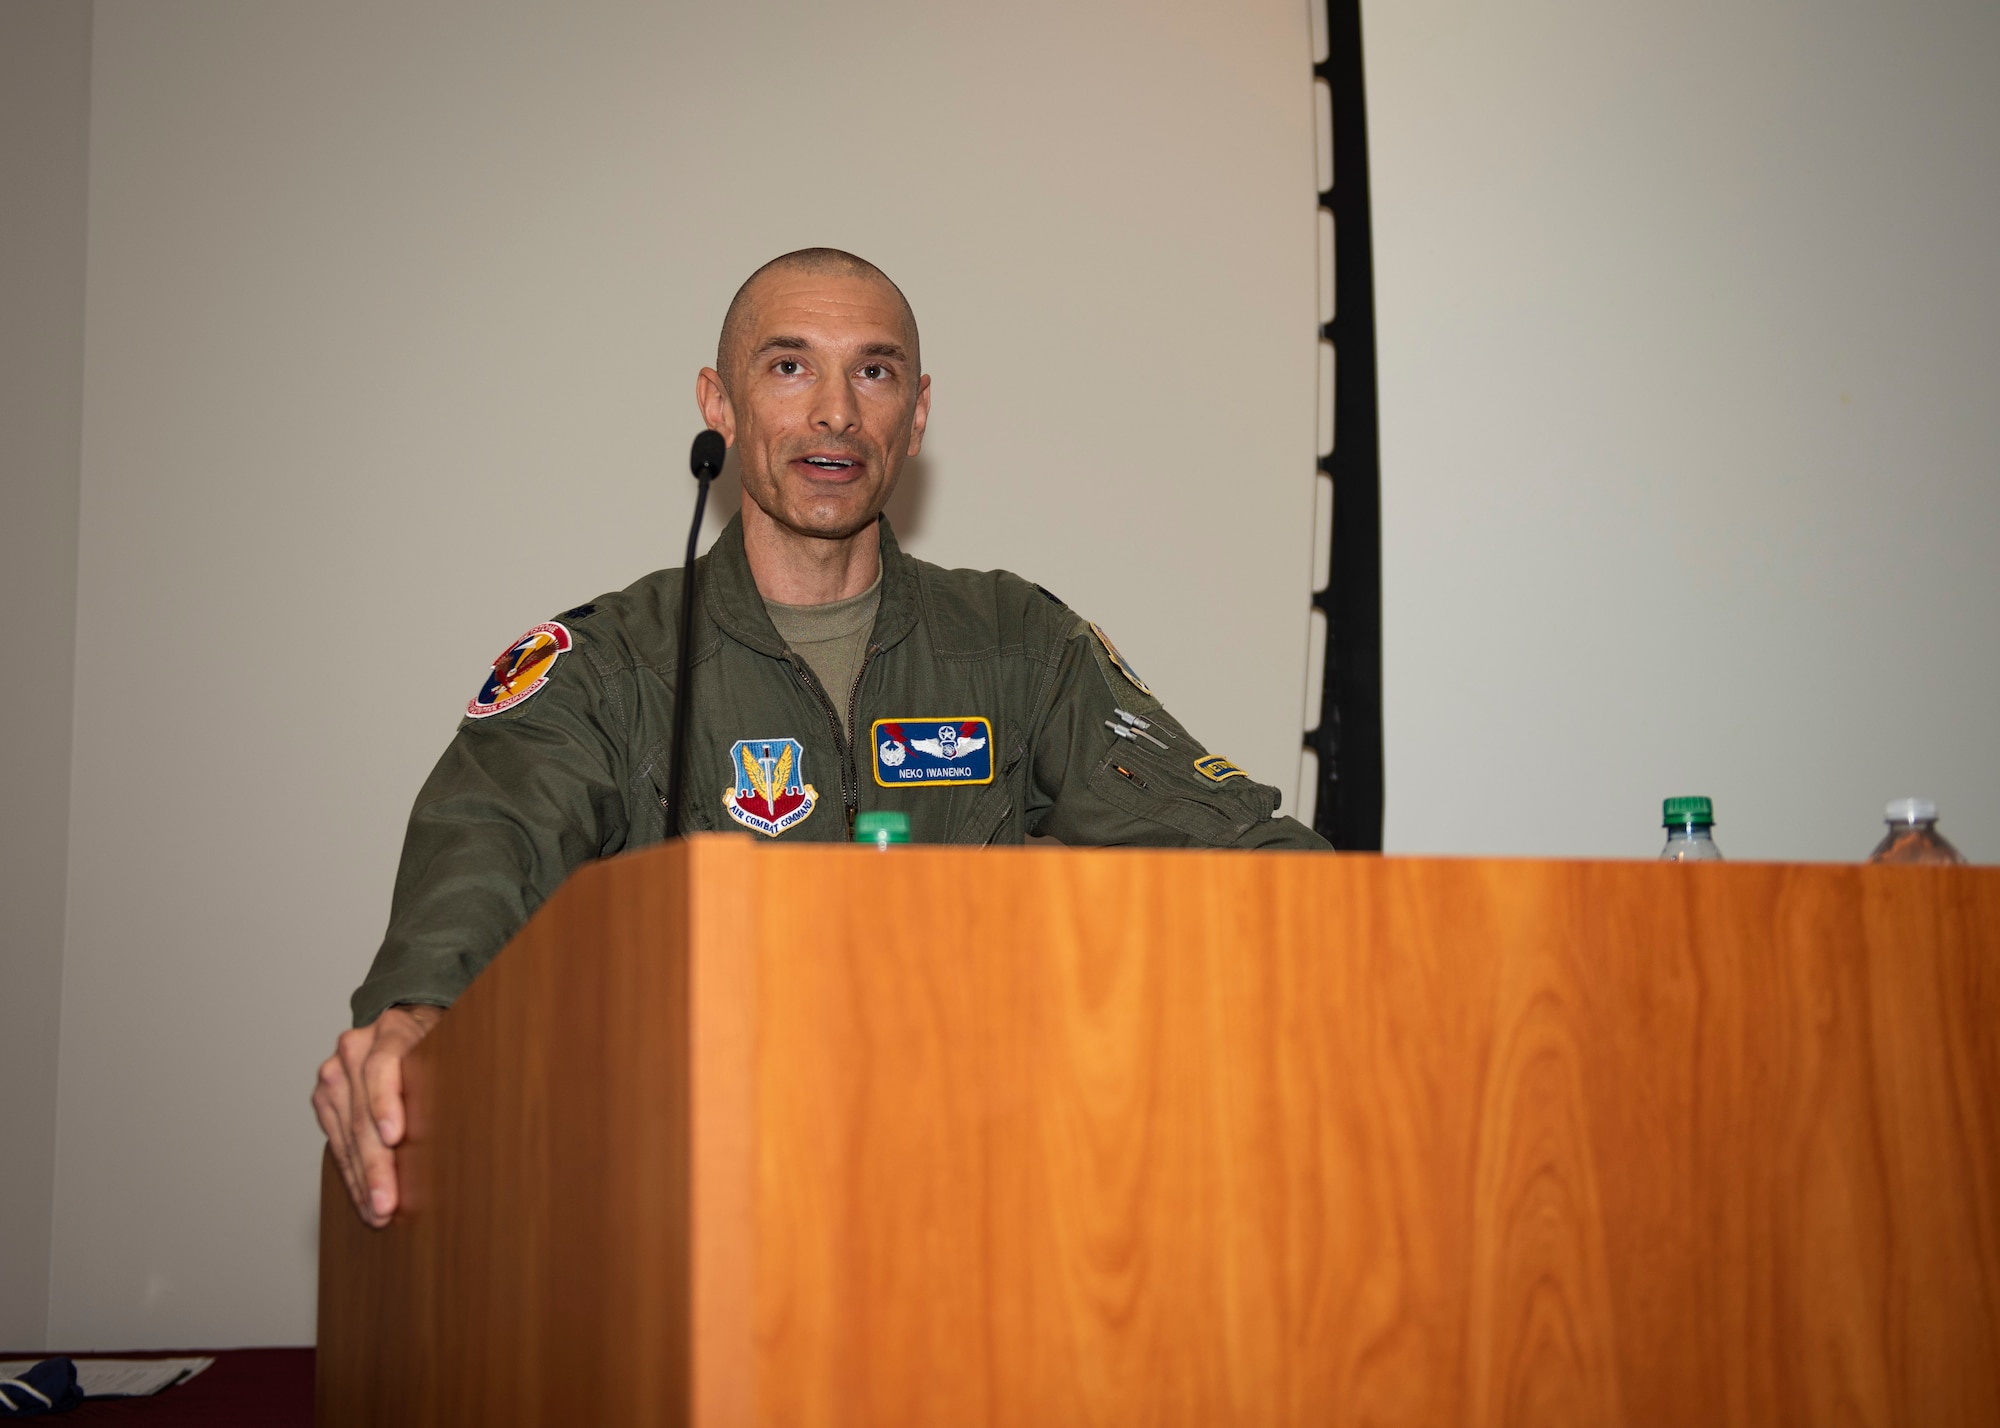 As a formal recognition of the hard work and efforts of the 53rd Wing Airmen at Tyndall Air Force Base in the 81st Range Control Squadron, the 81st RCS deactivated, then reactivated as the 81st Air Control Squadron during a ceremony on September 23, 2019.